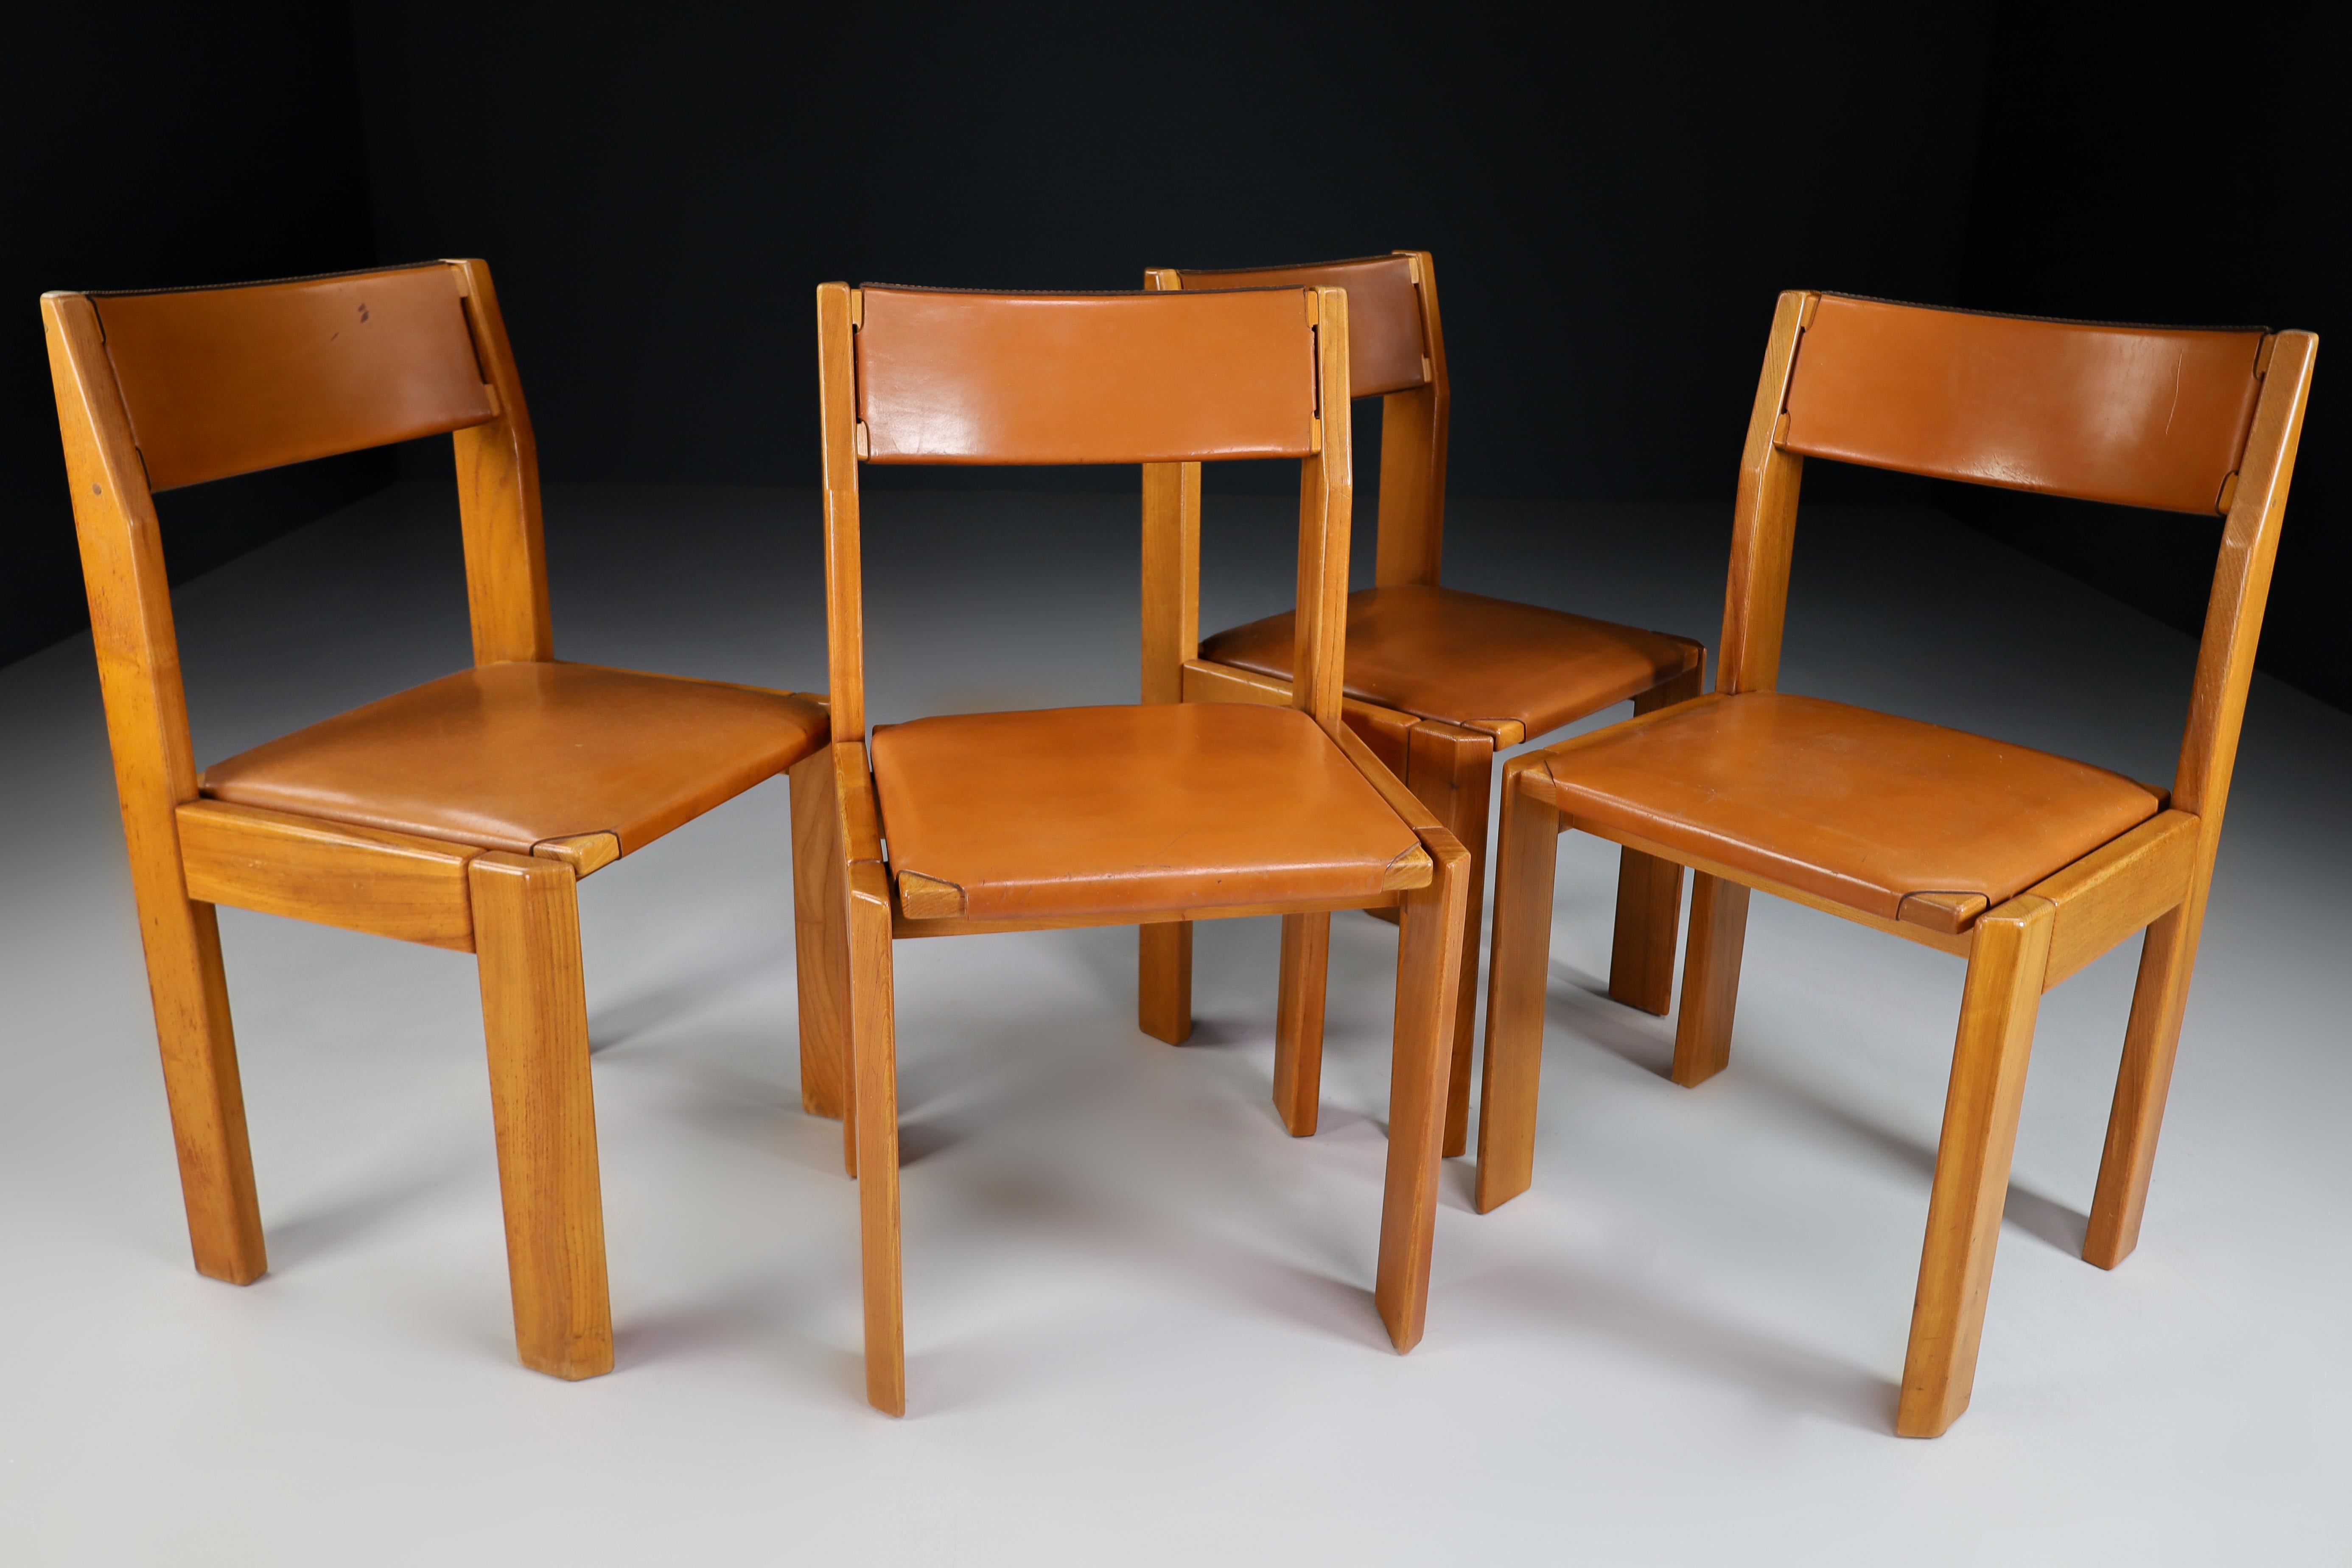 Maison Regain designed a gorgeous set of 4 dining chairs in France in the 1960s. A quality design in the manner of Pierre Chapo. The structure is in solid elm, and the seat and backrest are thick cognac leather with an attractive patina of age. In